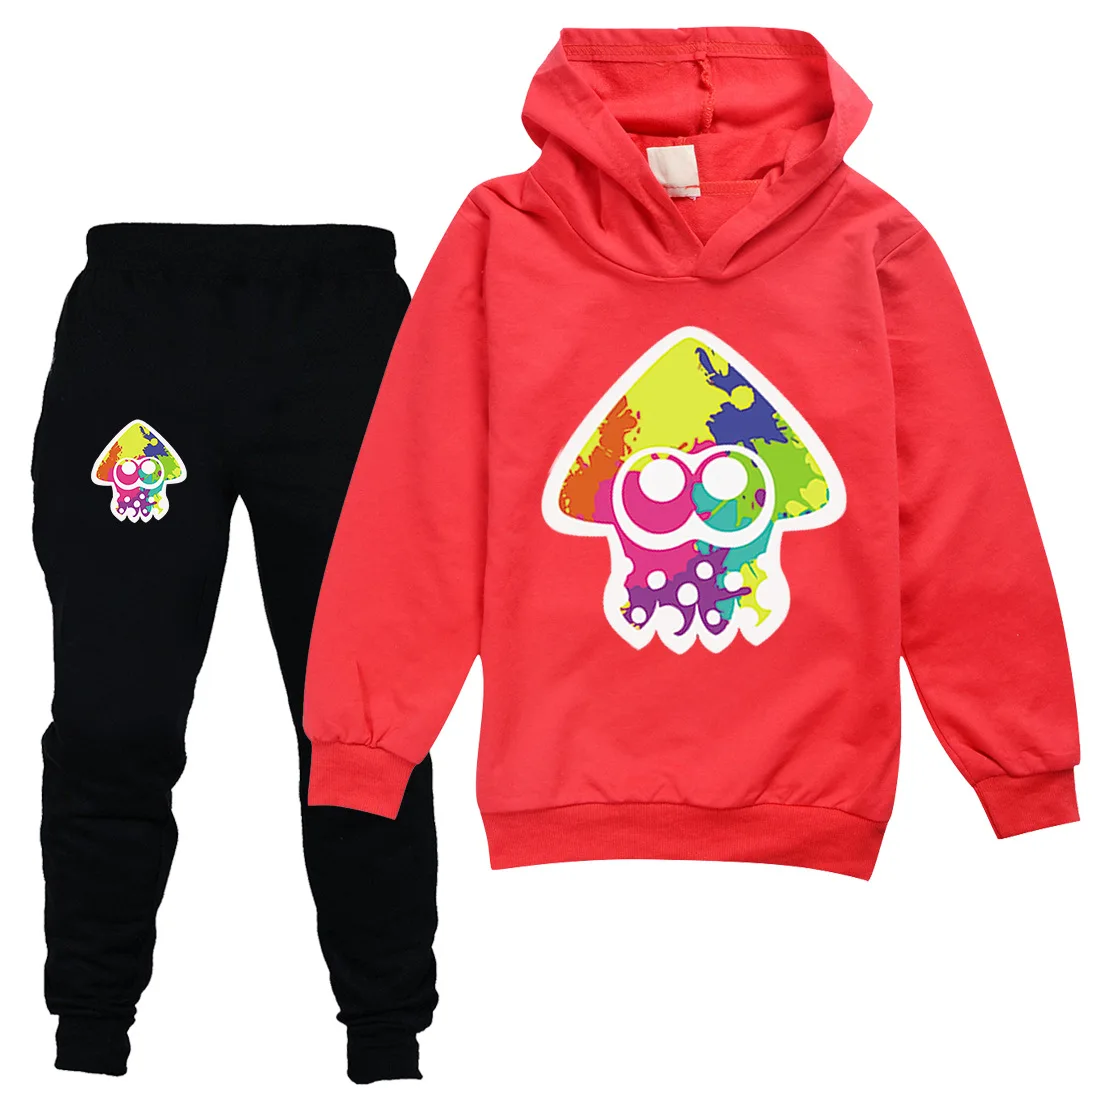 

Game Splatoon 2 Hoodie Kids Cartoon Octopus Clothes Boys Sweatshirt +jogging Pants 2pcs Sets for Teenager Girls Casual Outfits